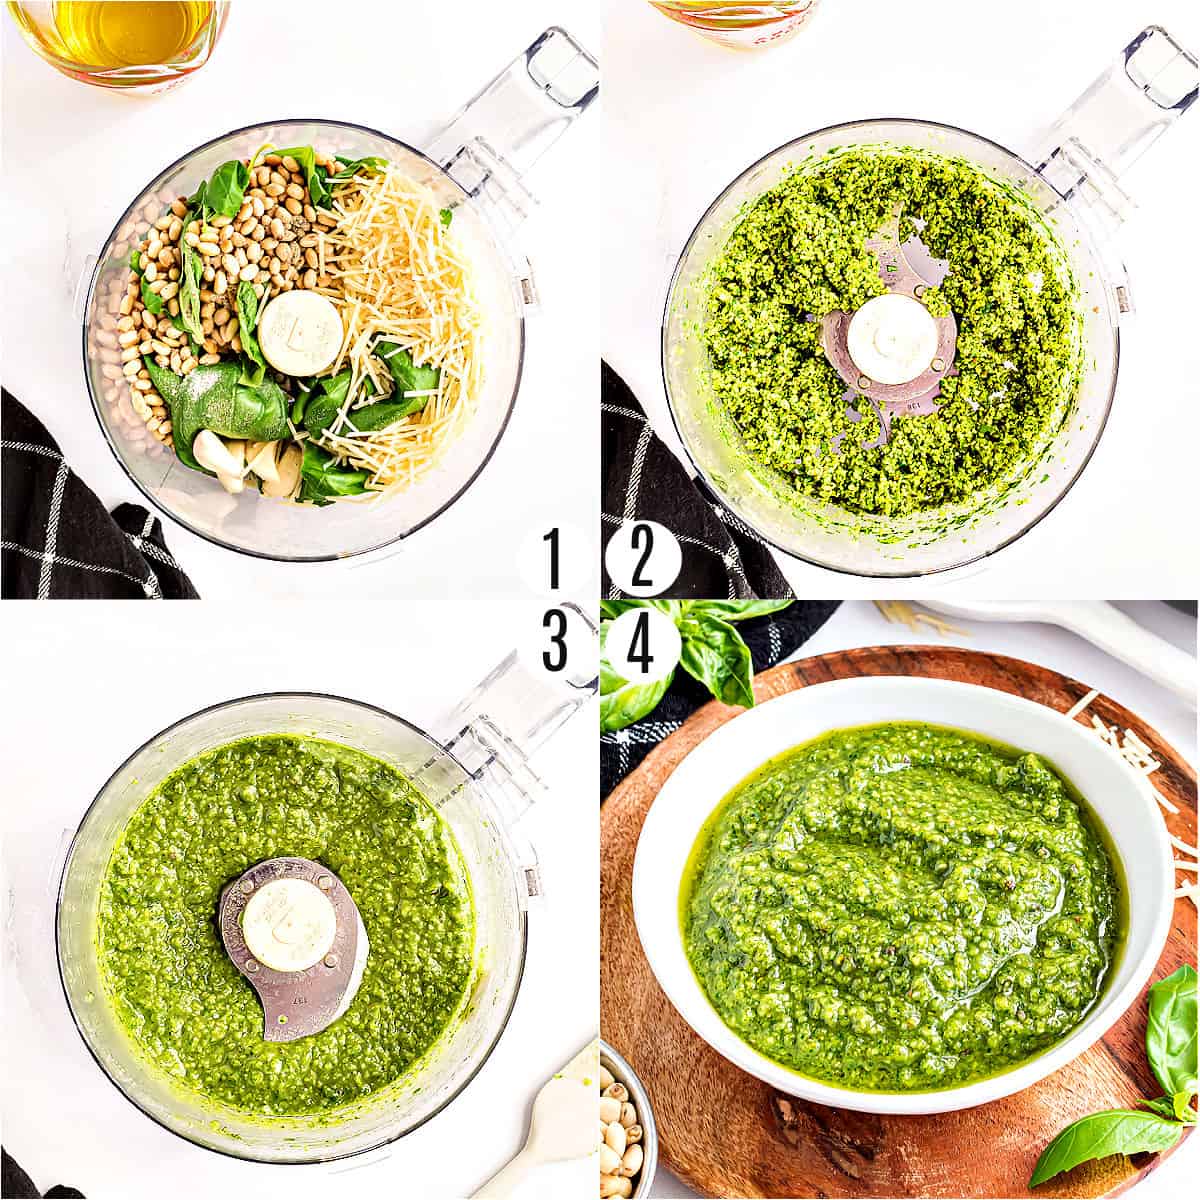 Step by step photos showing how to make pesto.